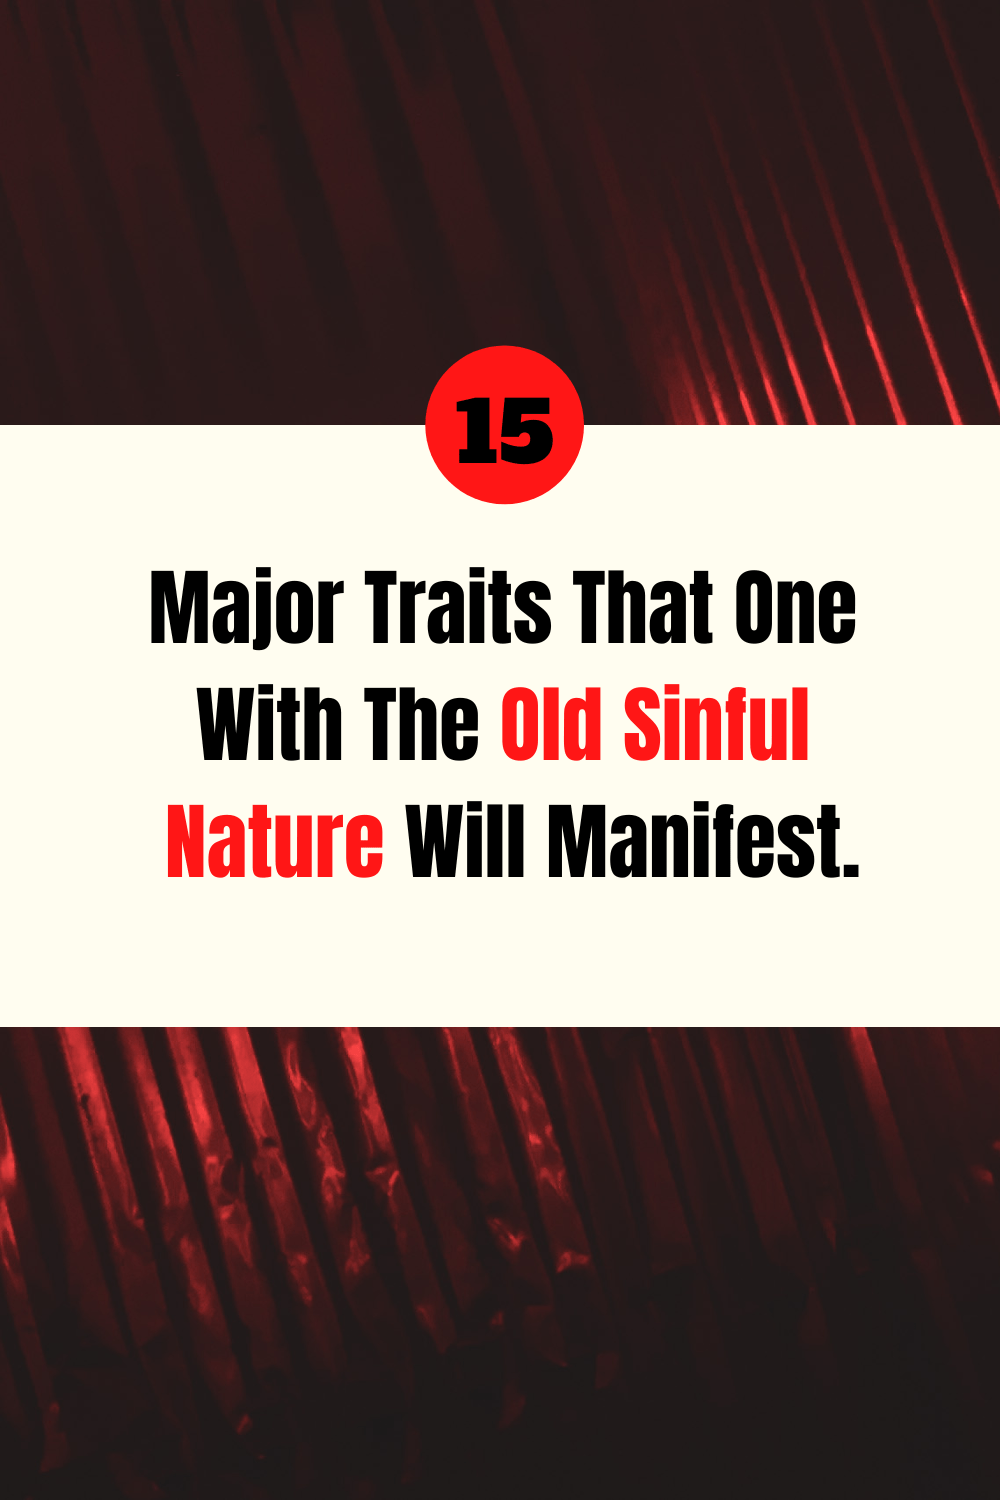 traits-of-the-old-sinful-nature.